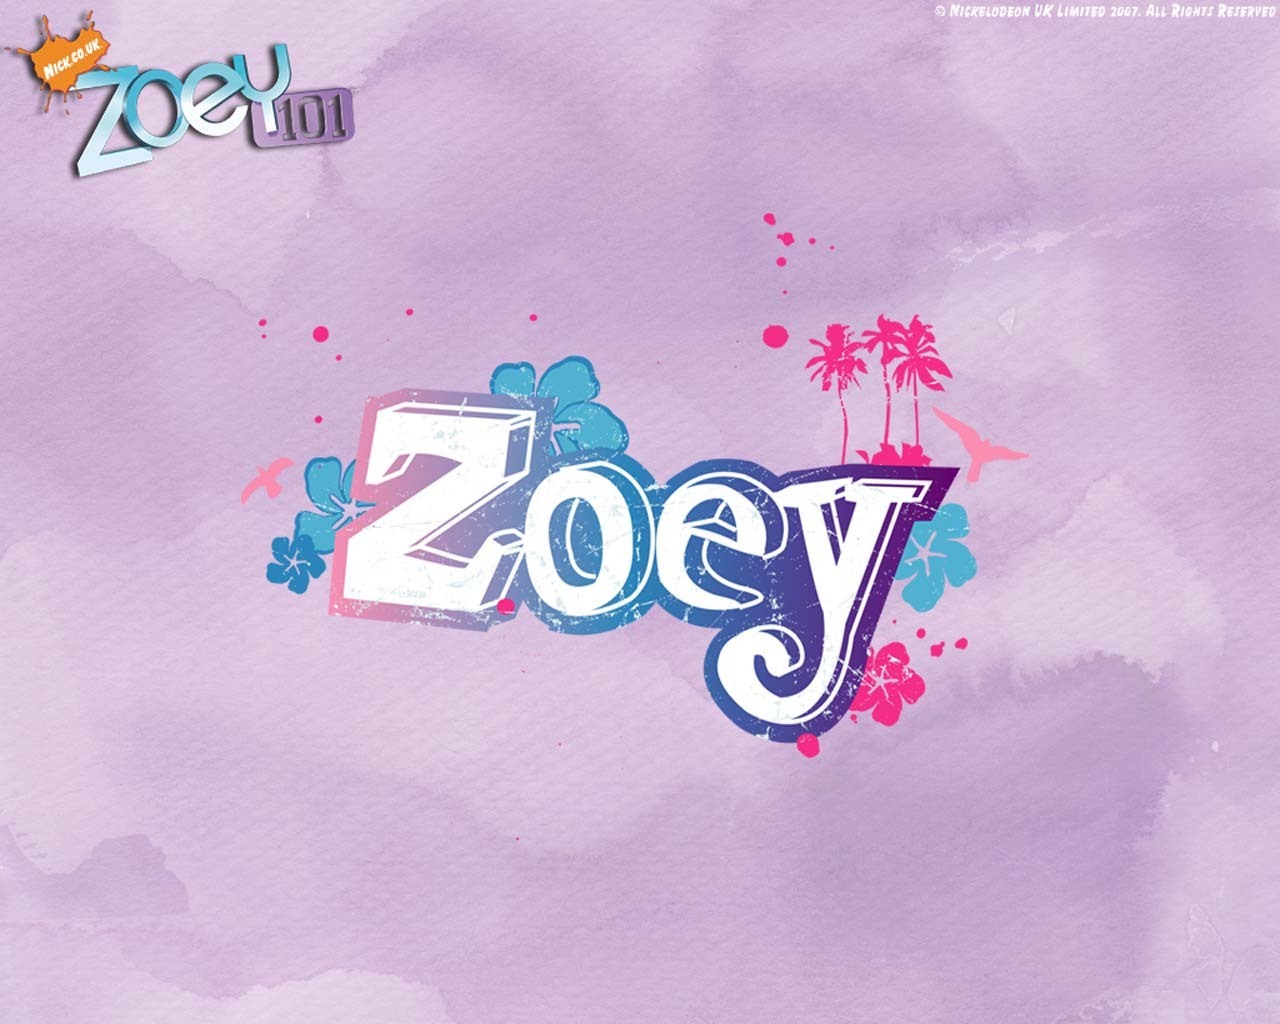 Zoey Wallpaper Submited Image